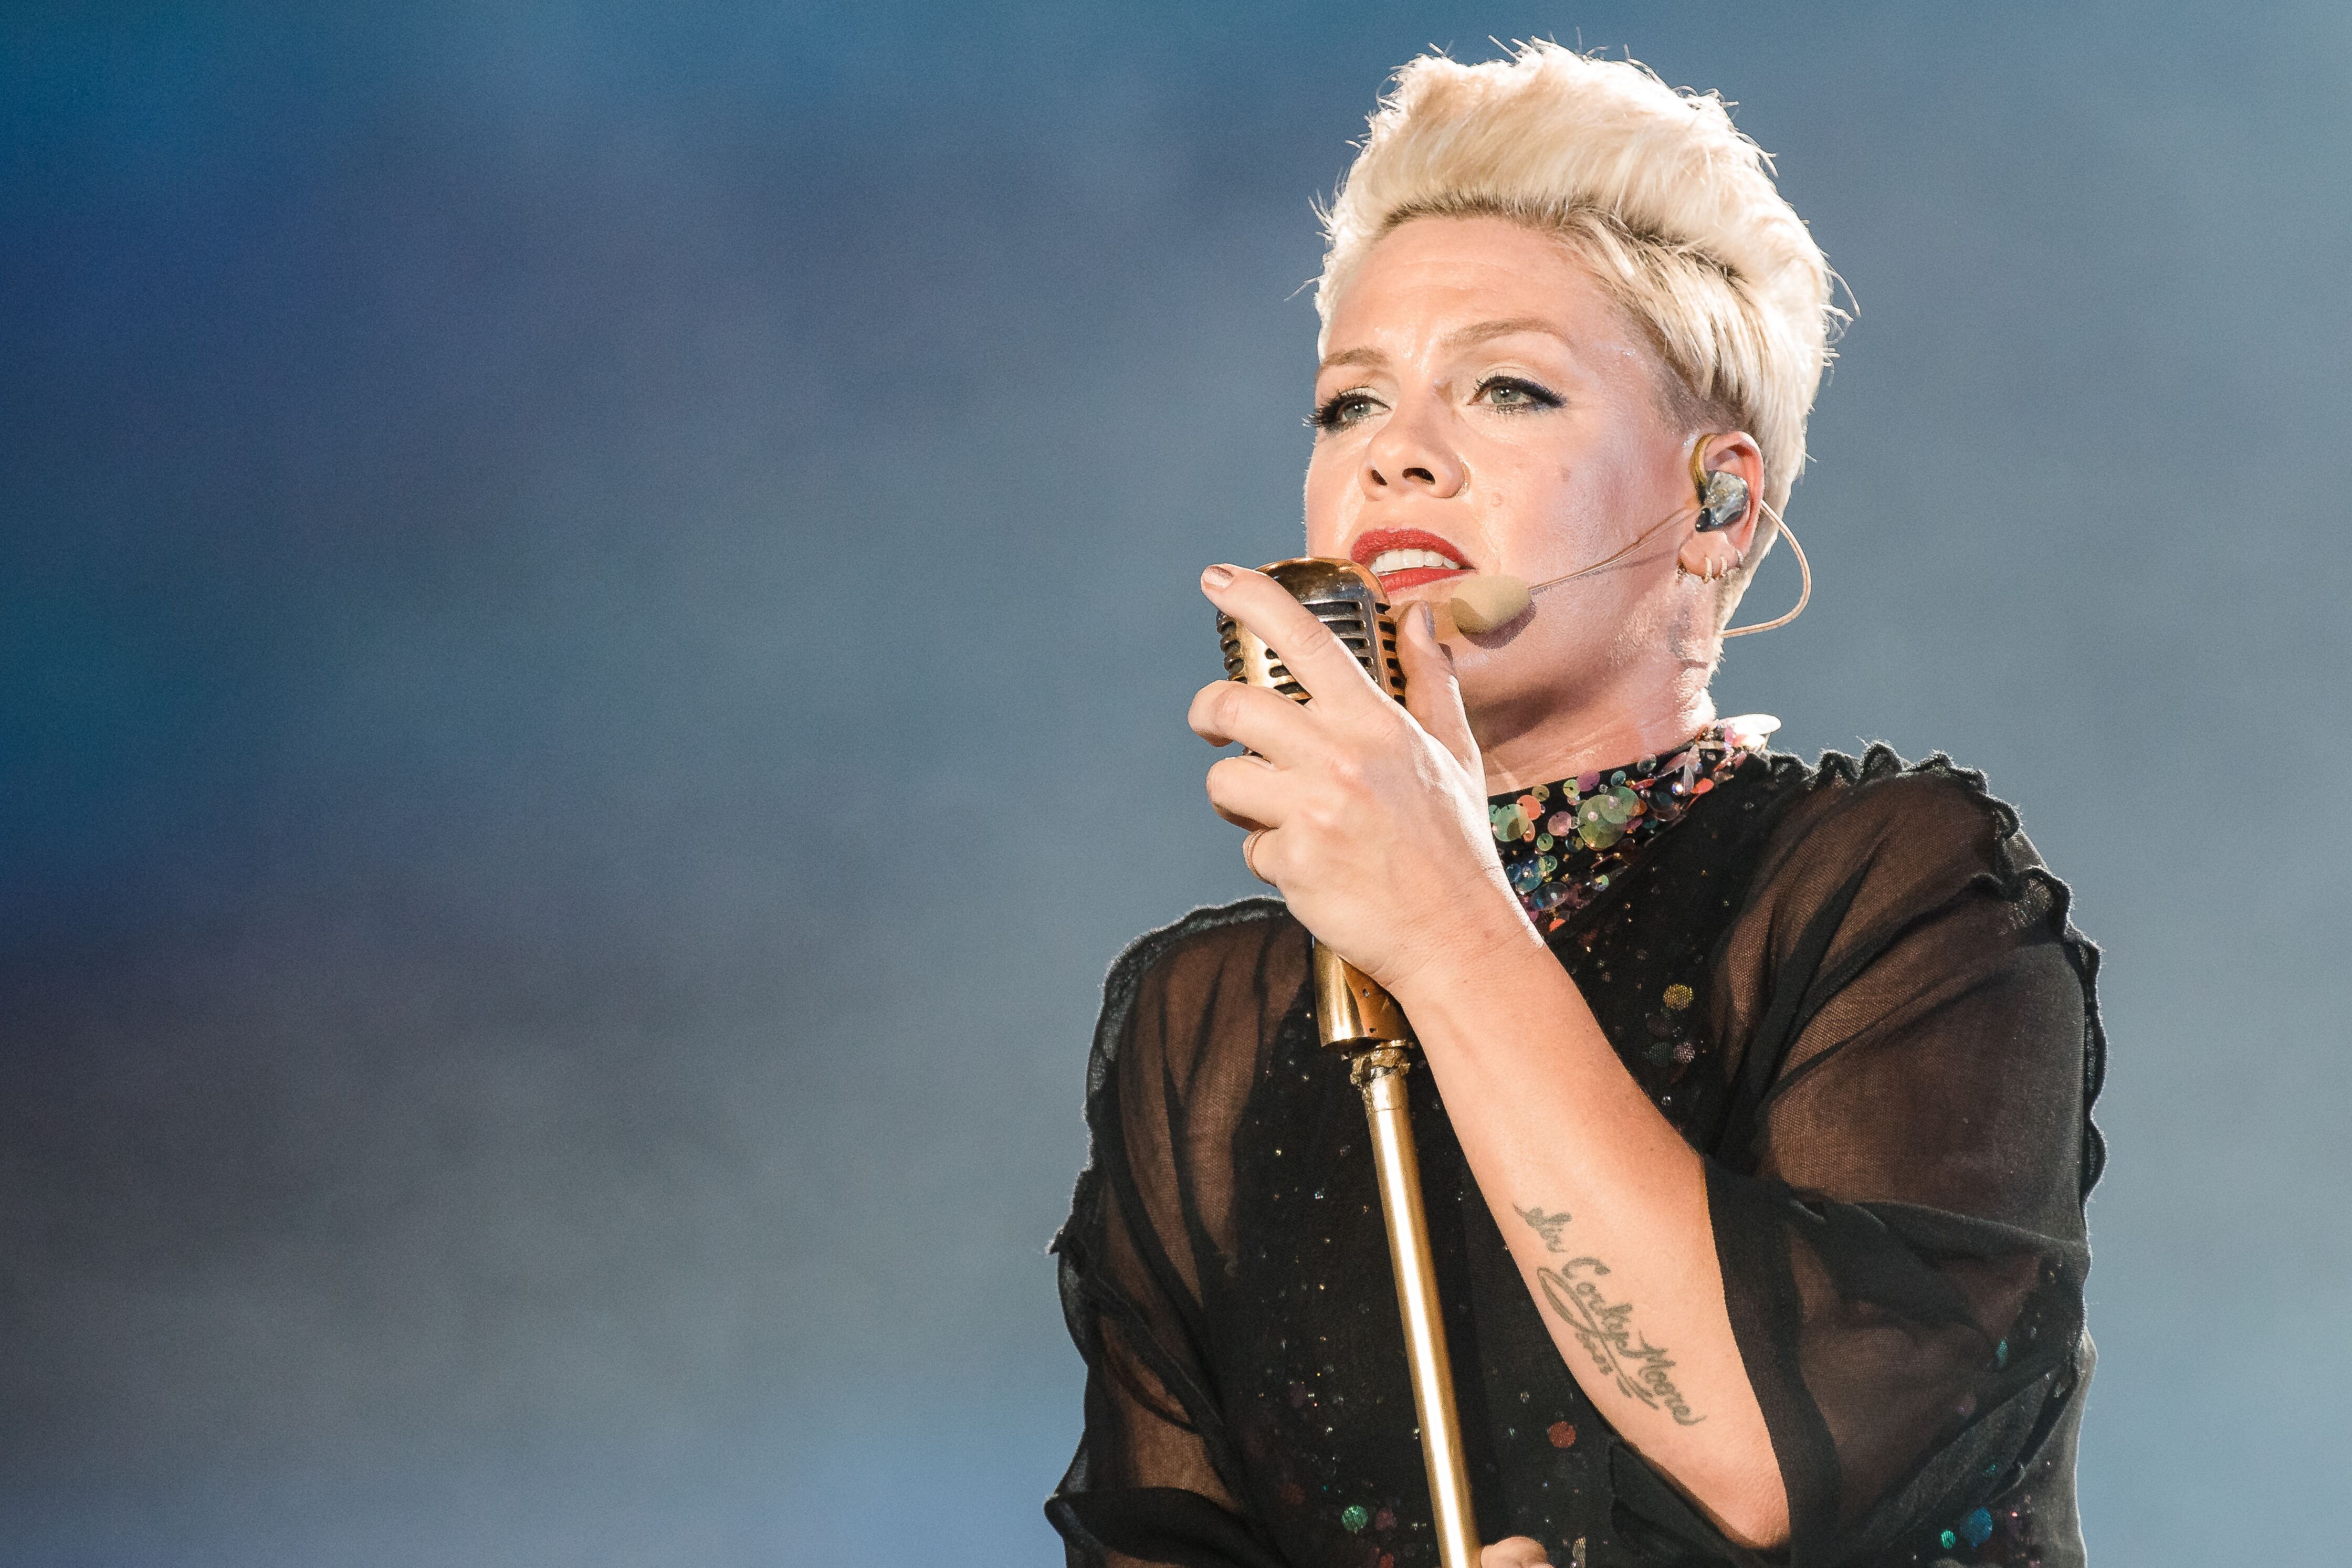 Pink performs live on stage during day 6 of Rock In Rio Music Festival at Cidade do Rock on October 5, 2019 in Rio de Janeiro, Brazil. | Source: Getty Images